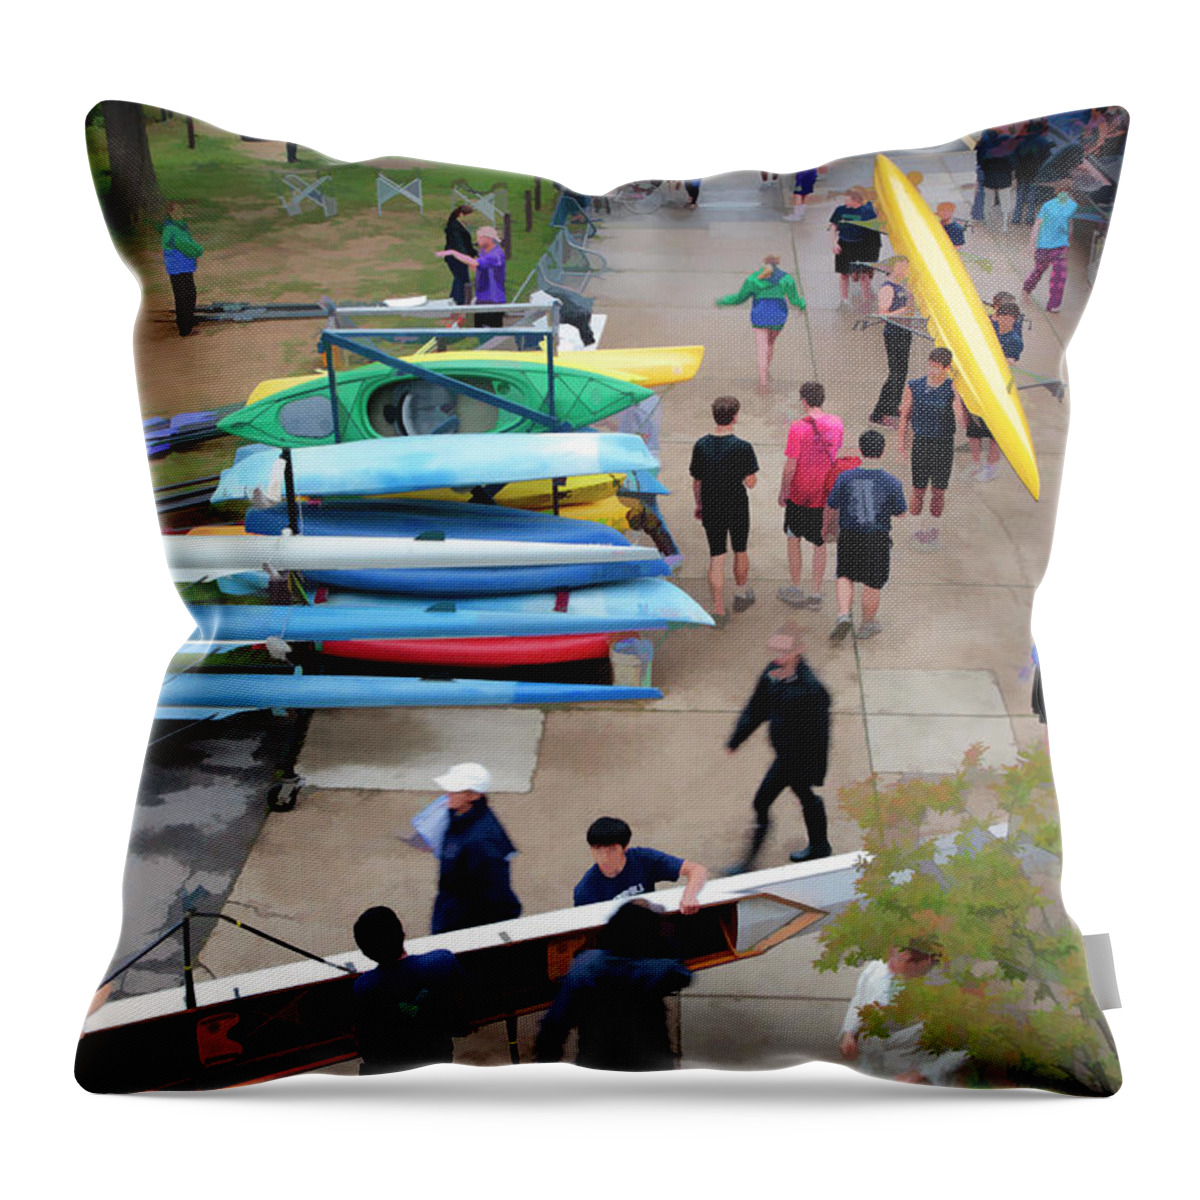 Crew Throw Pillow featuring the digital art Carrying the Boats at a Rowing Regatta by William Kuta